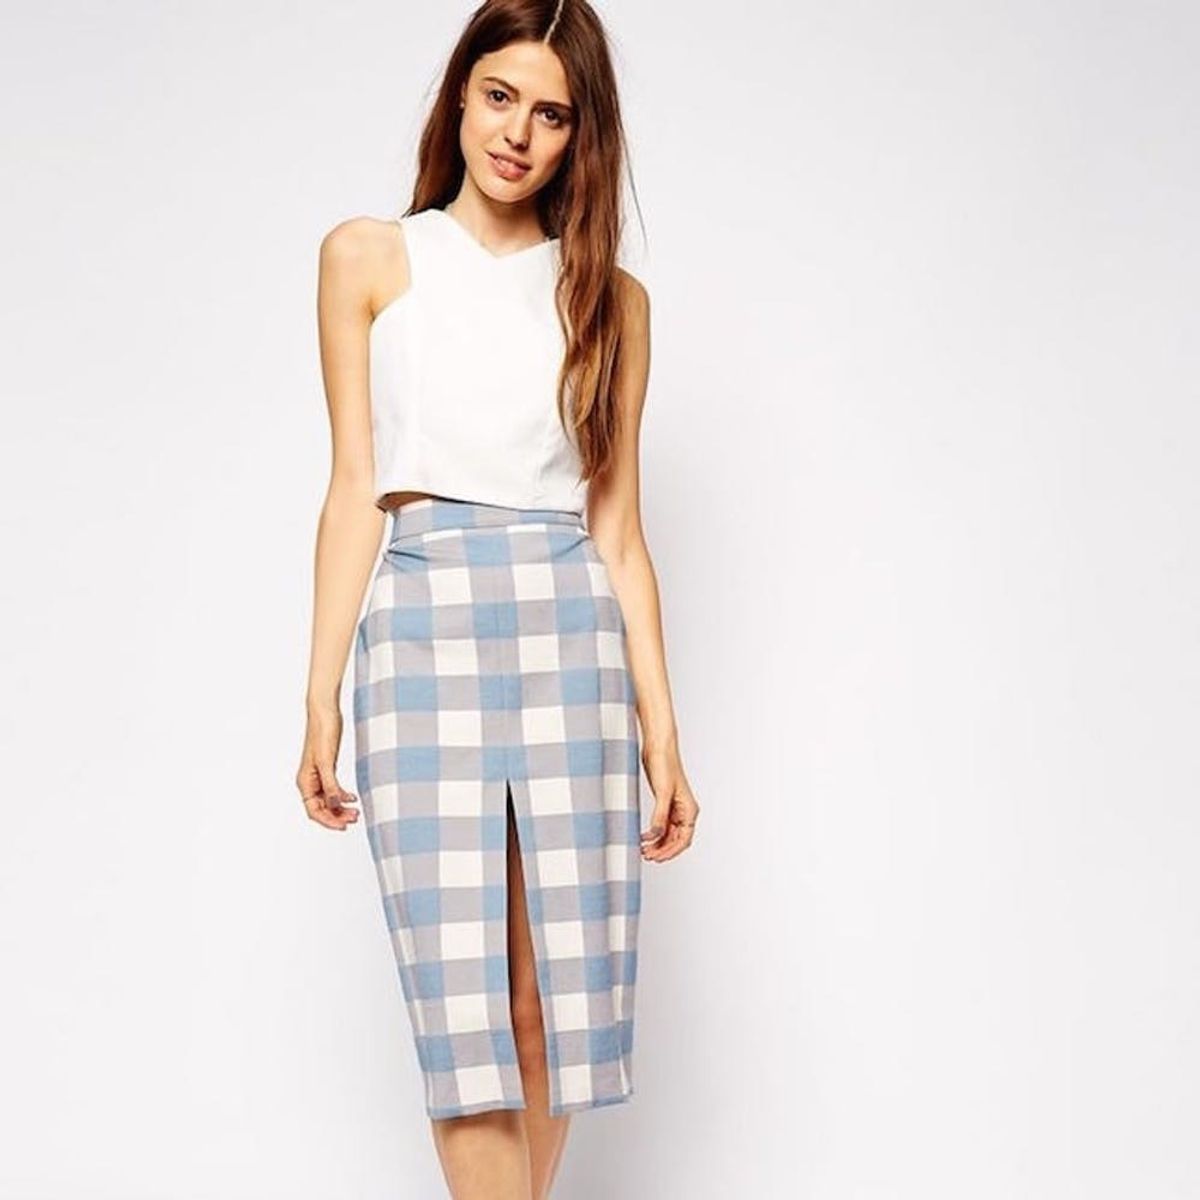 Spring Forward With These 18 Grown-Up Gingham Prints